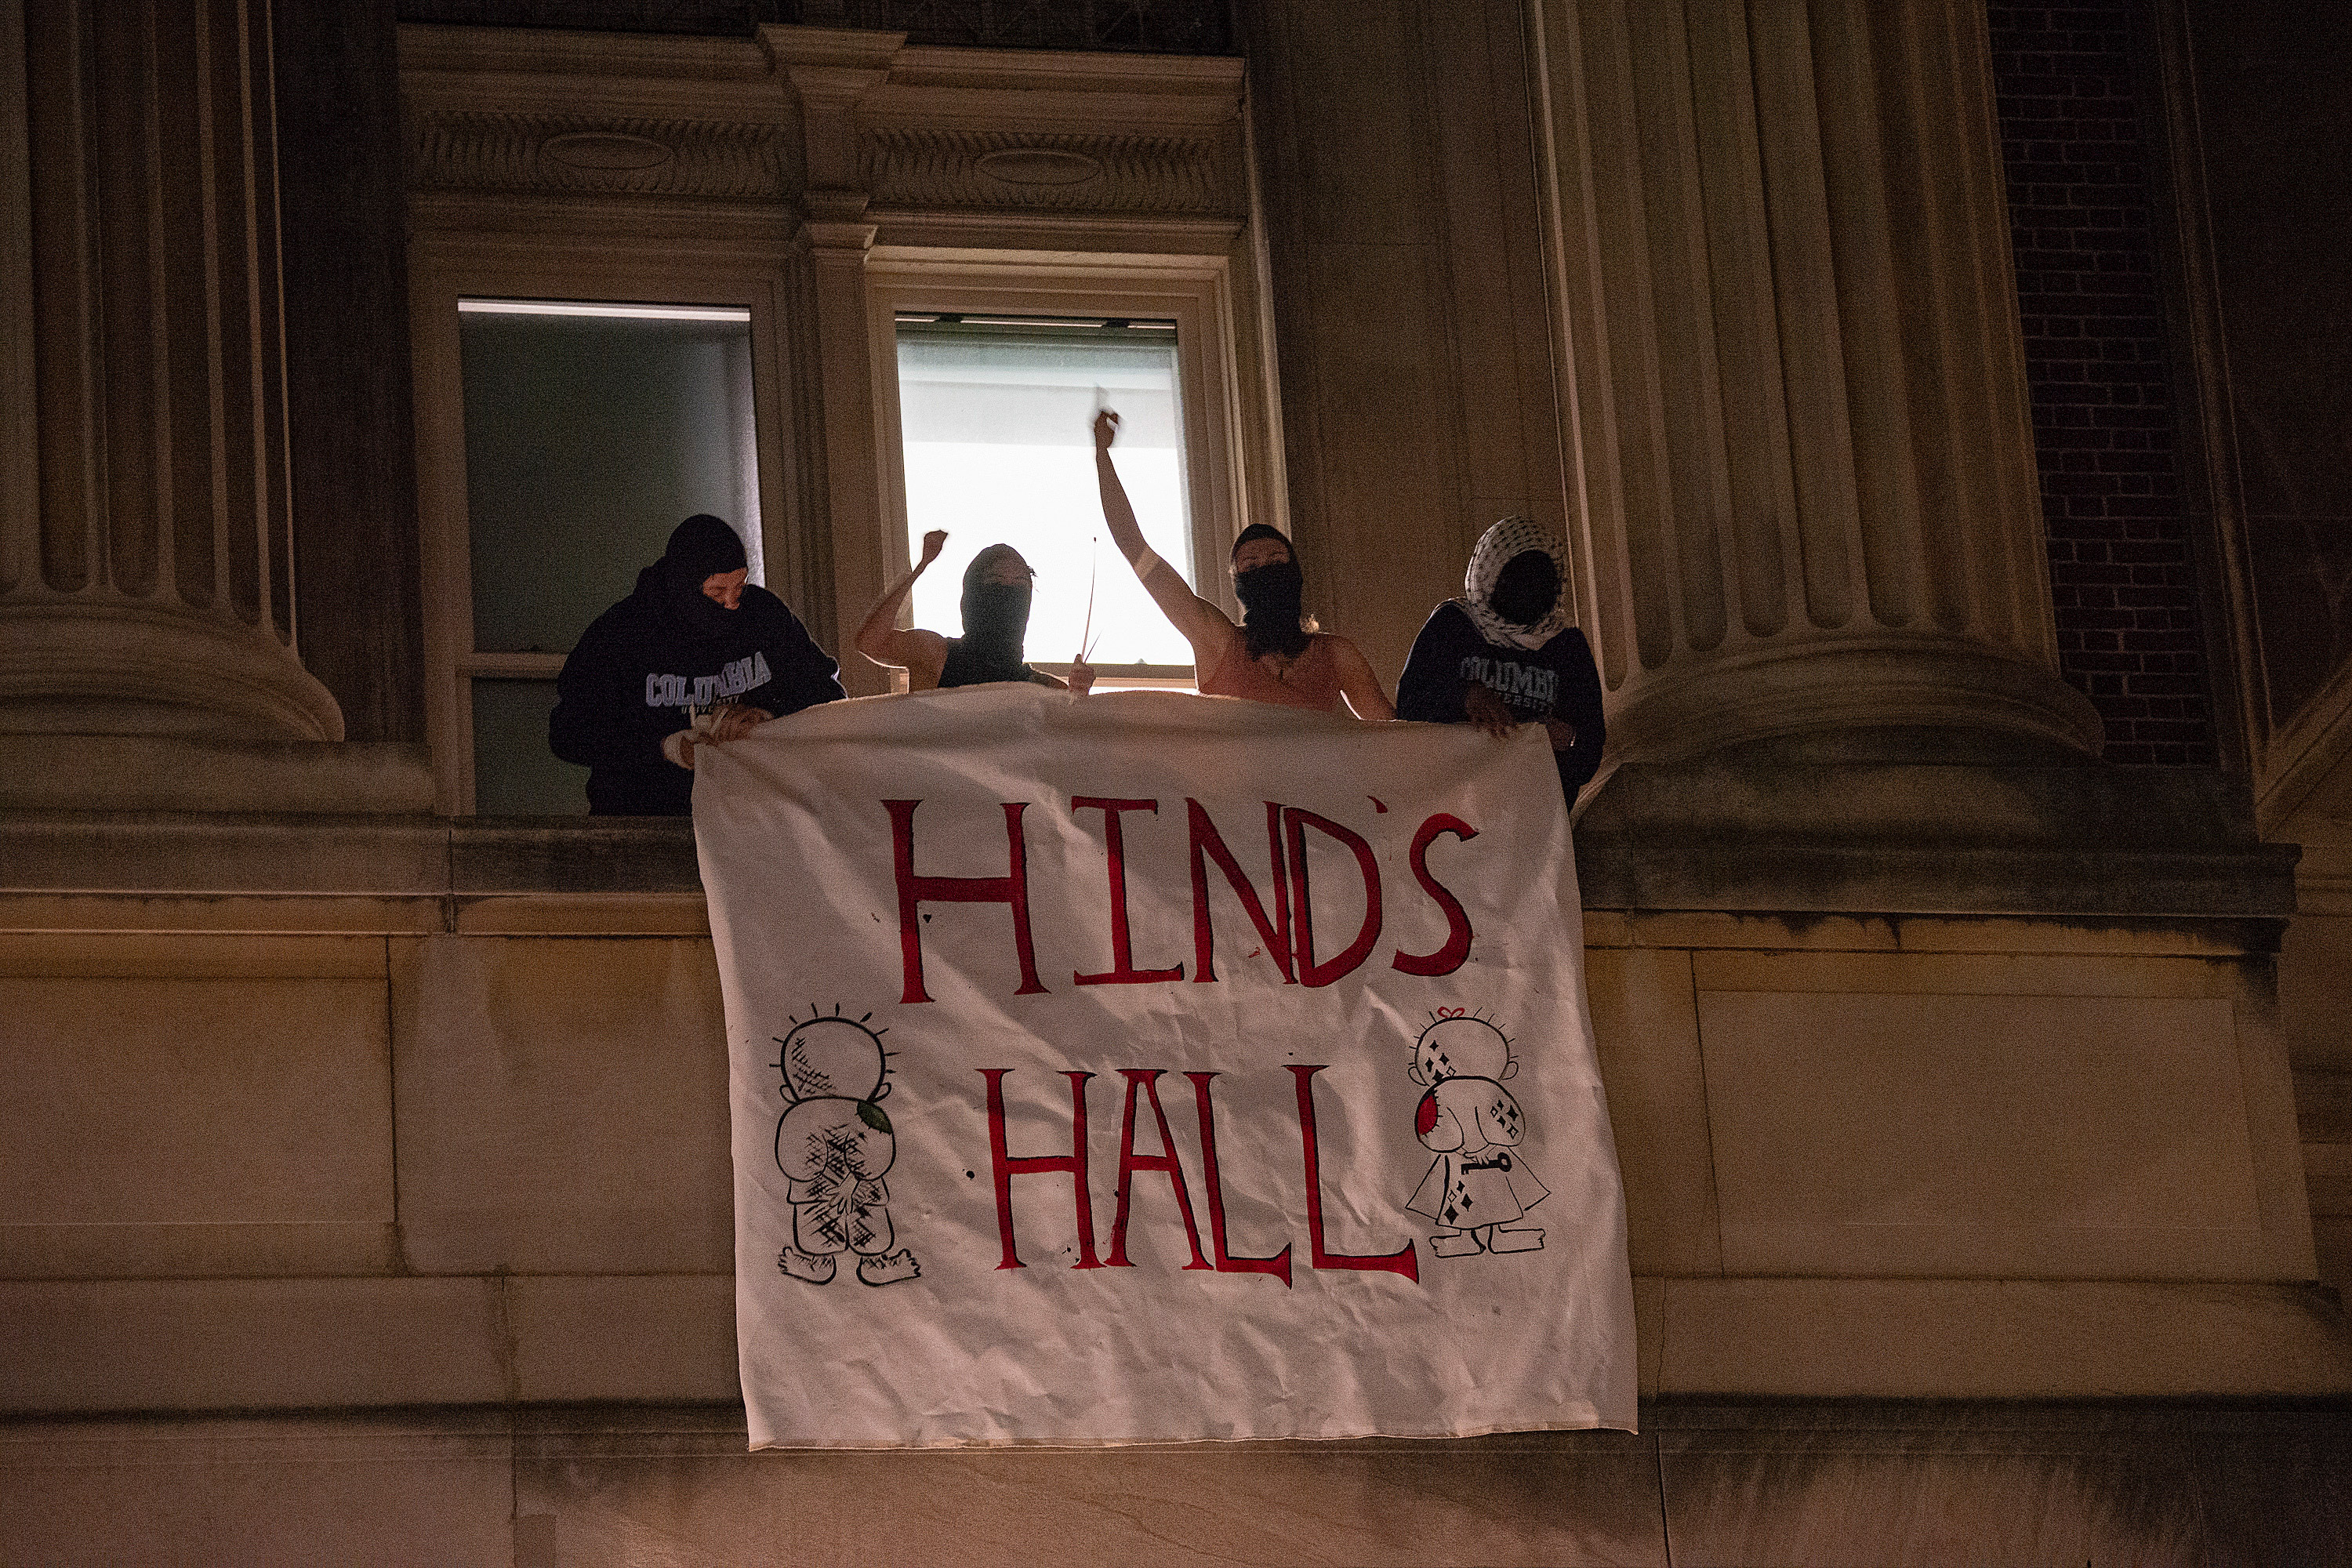 People hang a banner outside of Hamilton Hall at Columbia University in New York in the early hours of Tuesday.